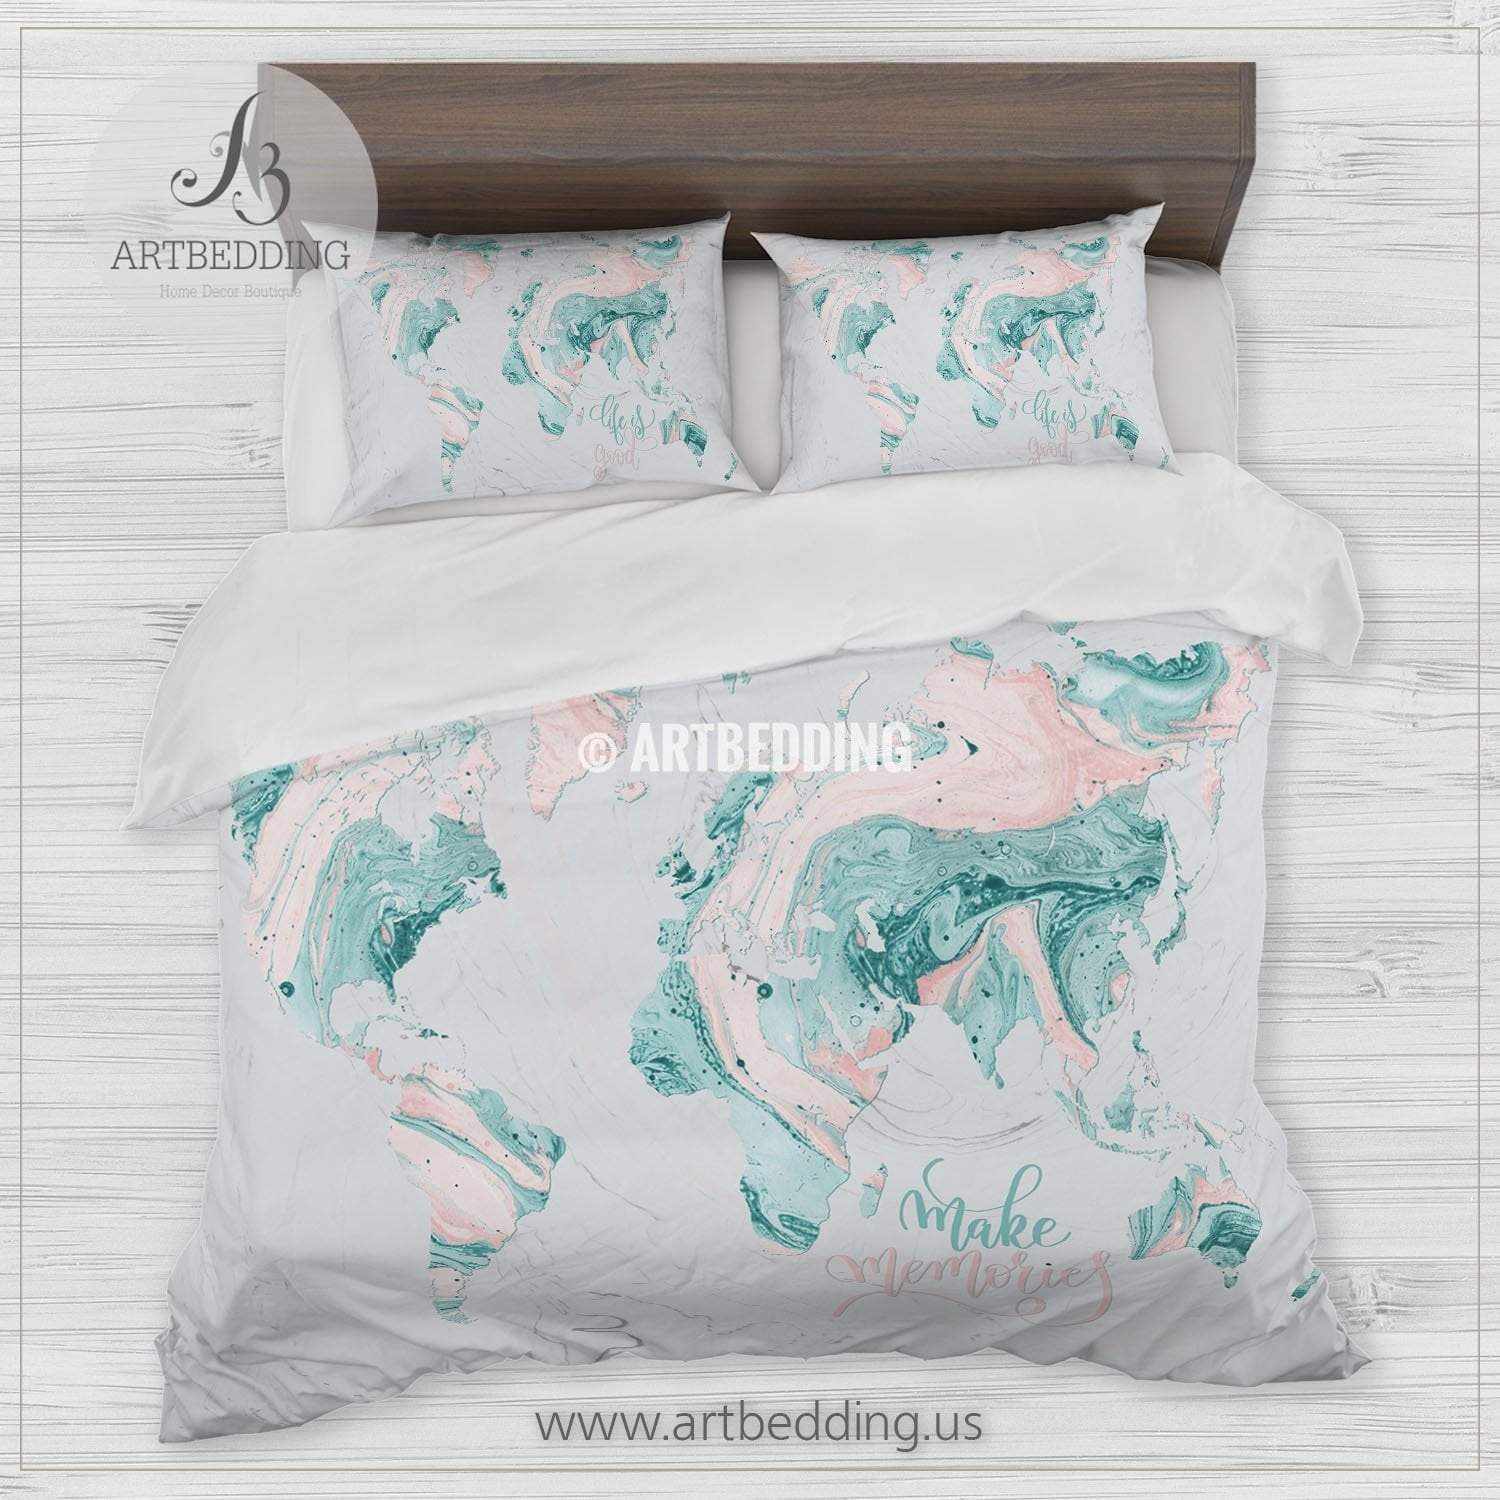 Marble Map Bedding Abstract Liquid Teal And Blush Pink Marble Map